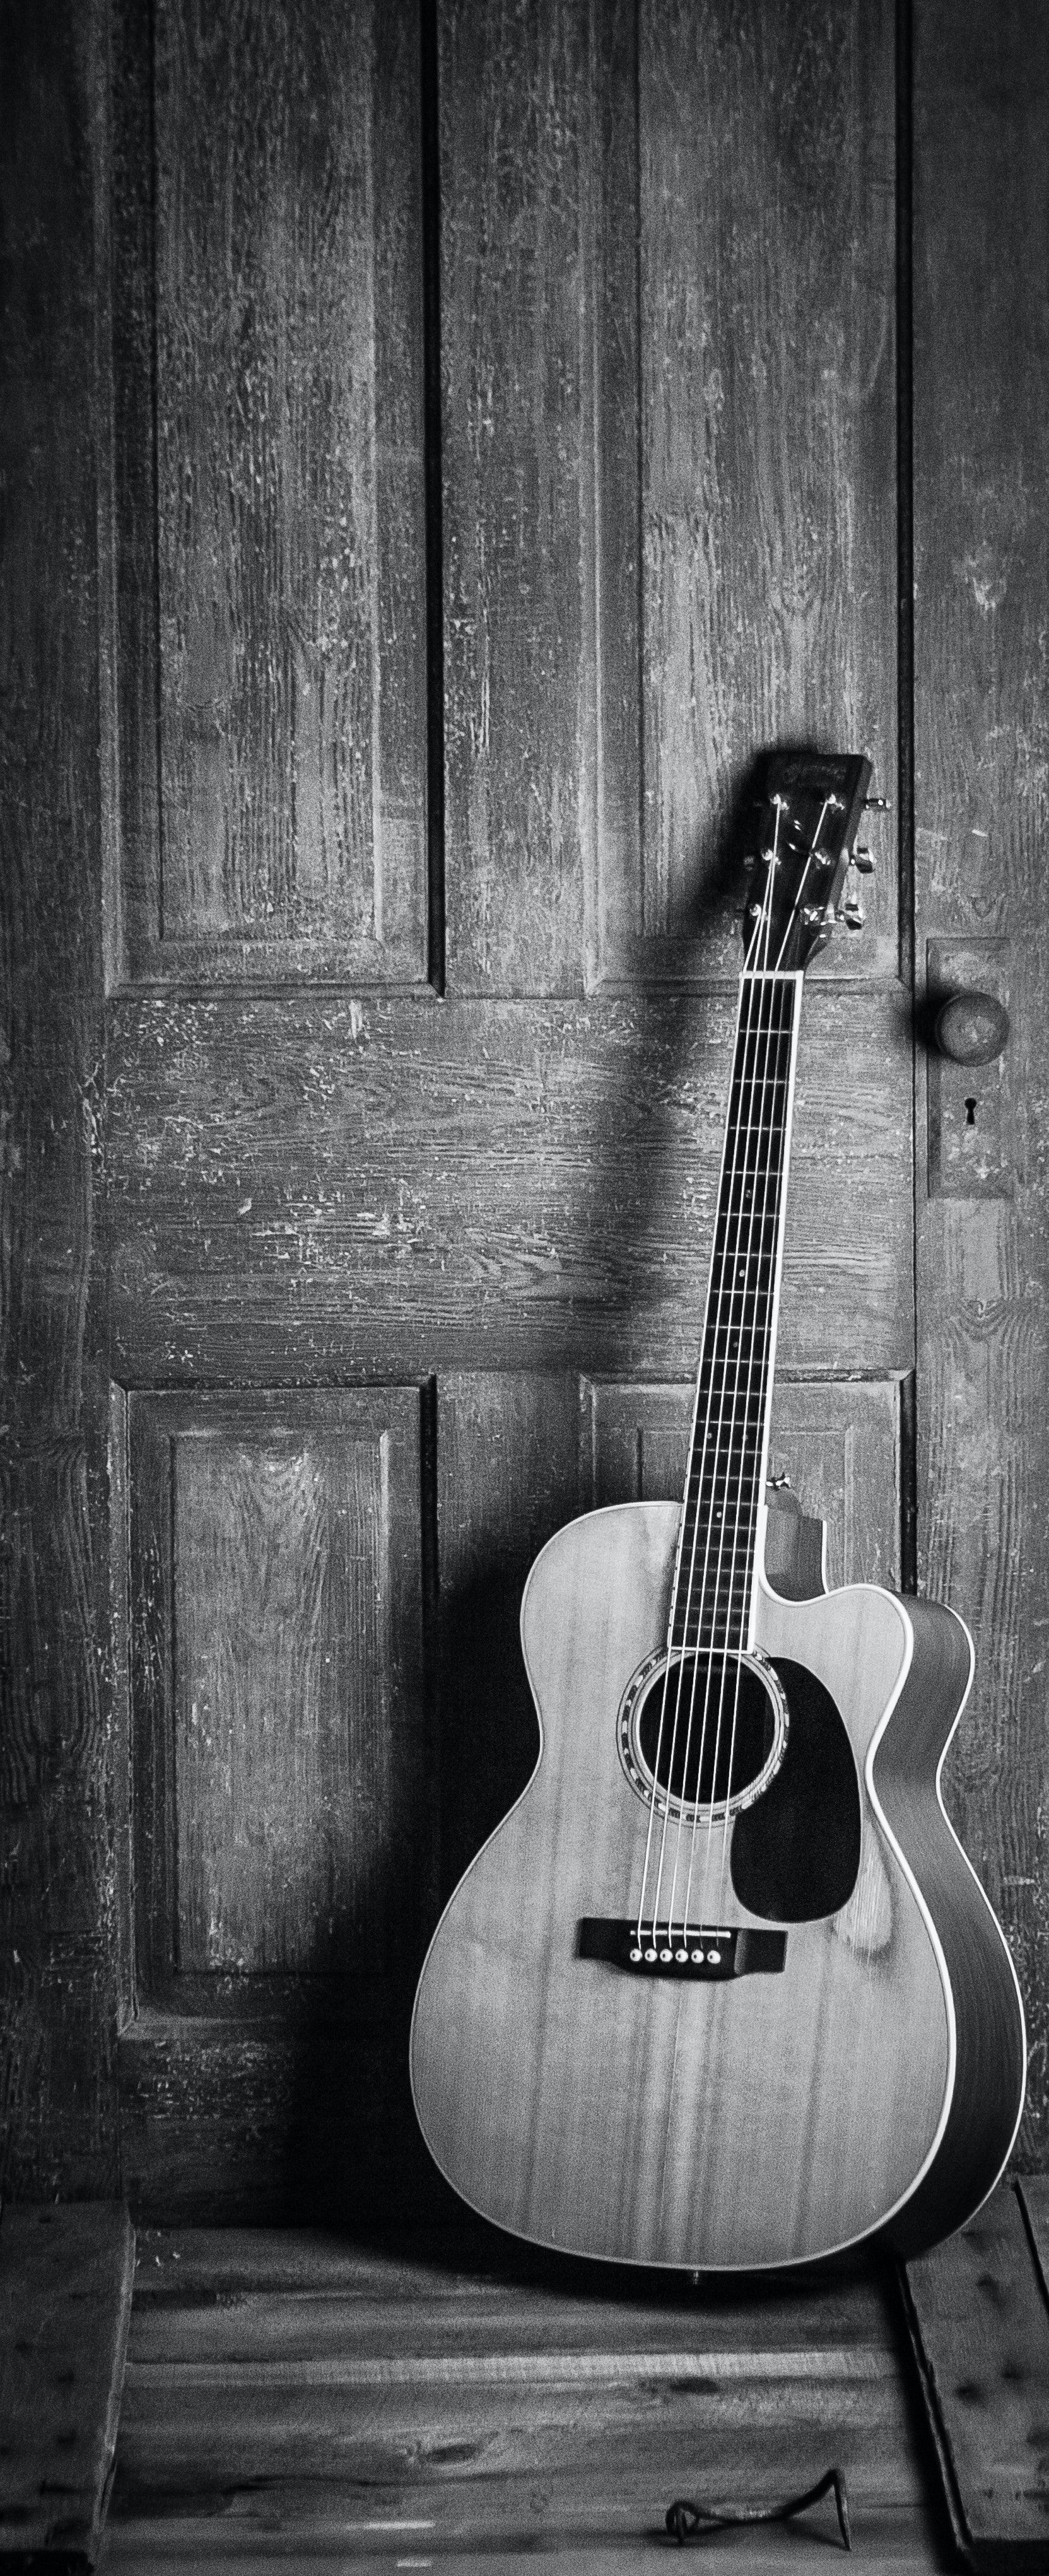 Black and white photo of a guitar leaning against a wooden door. - Guitar